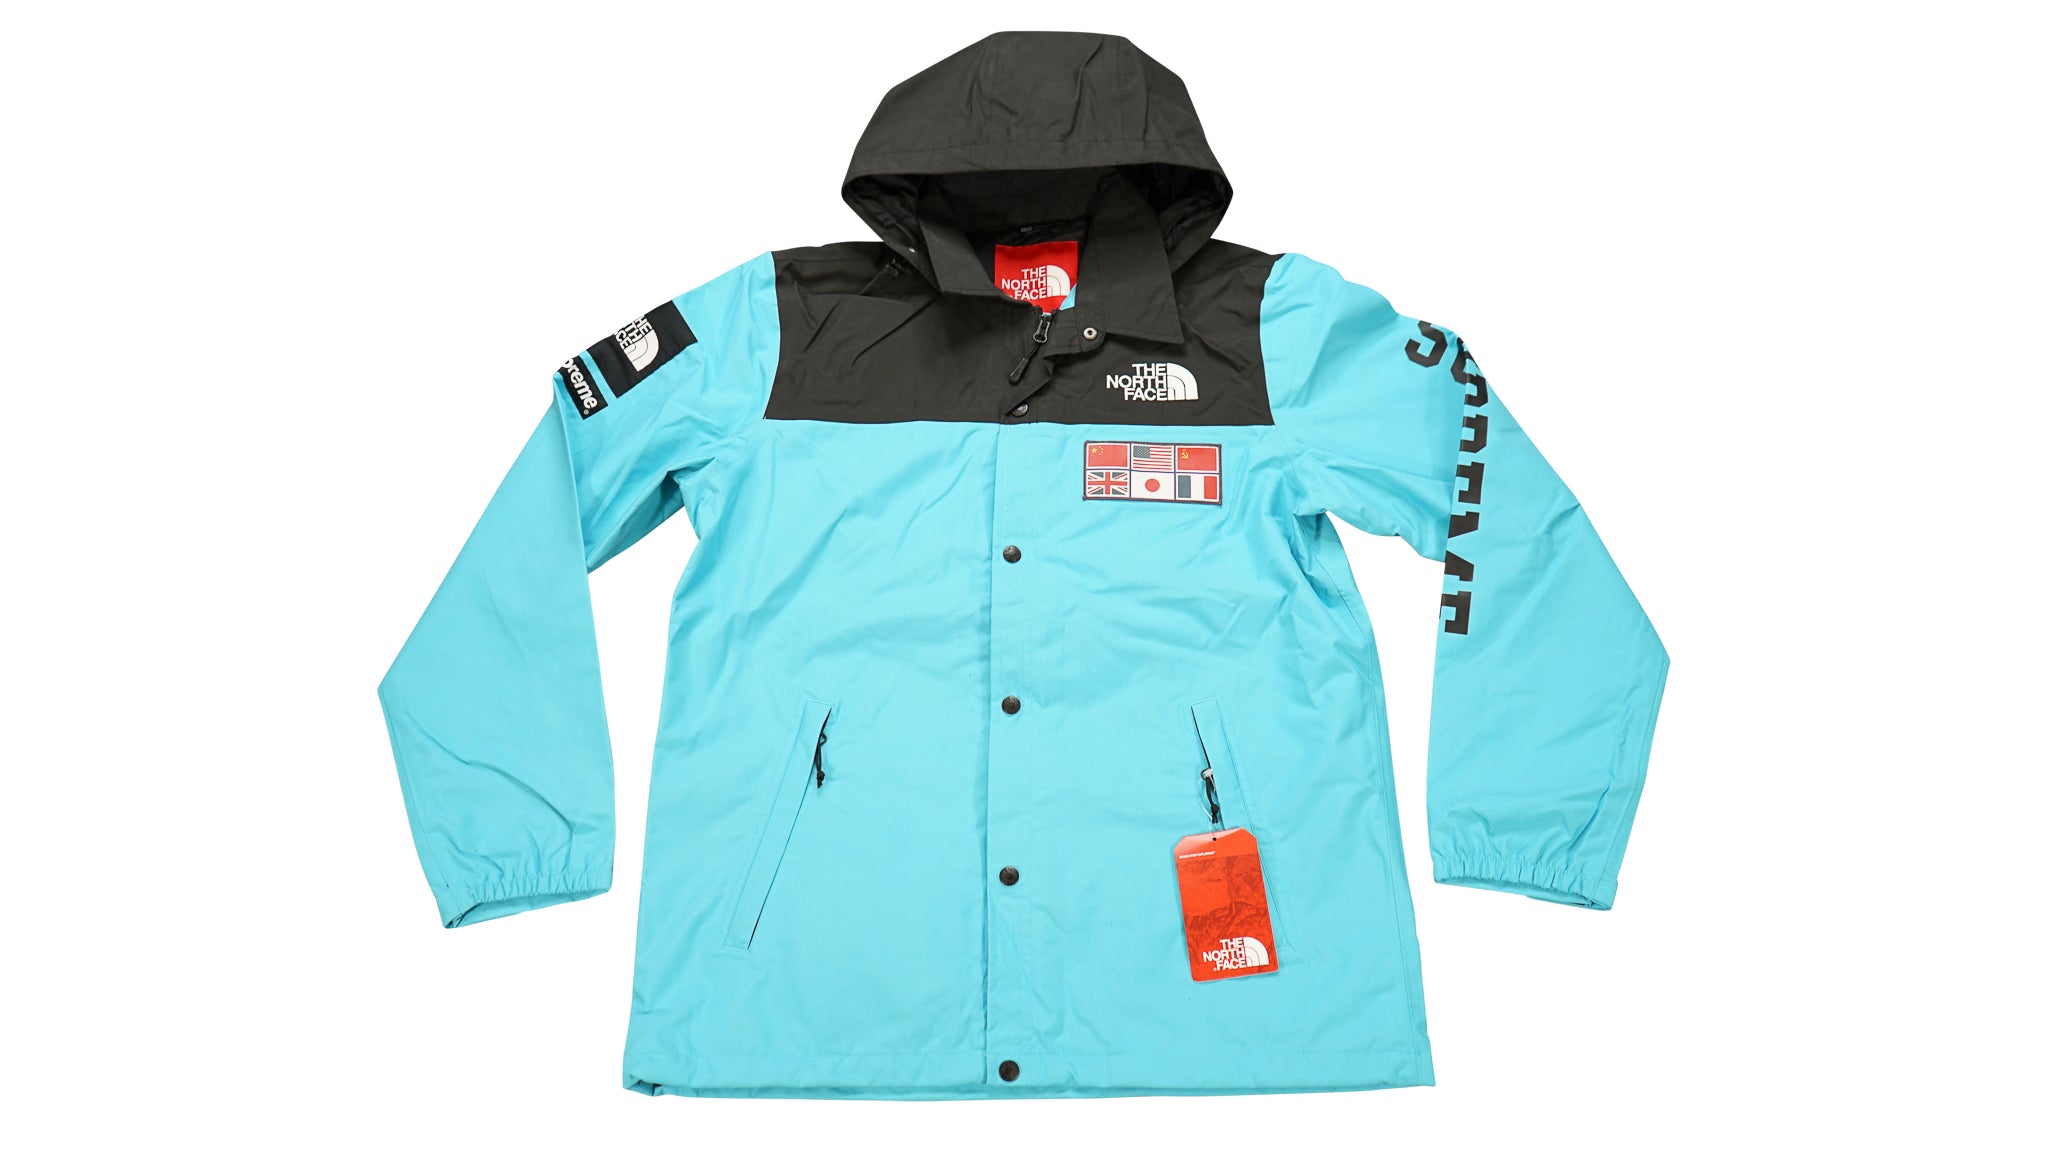 SS14 Supreme x The North Face 